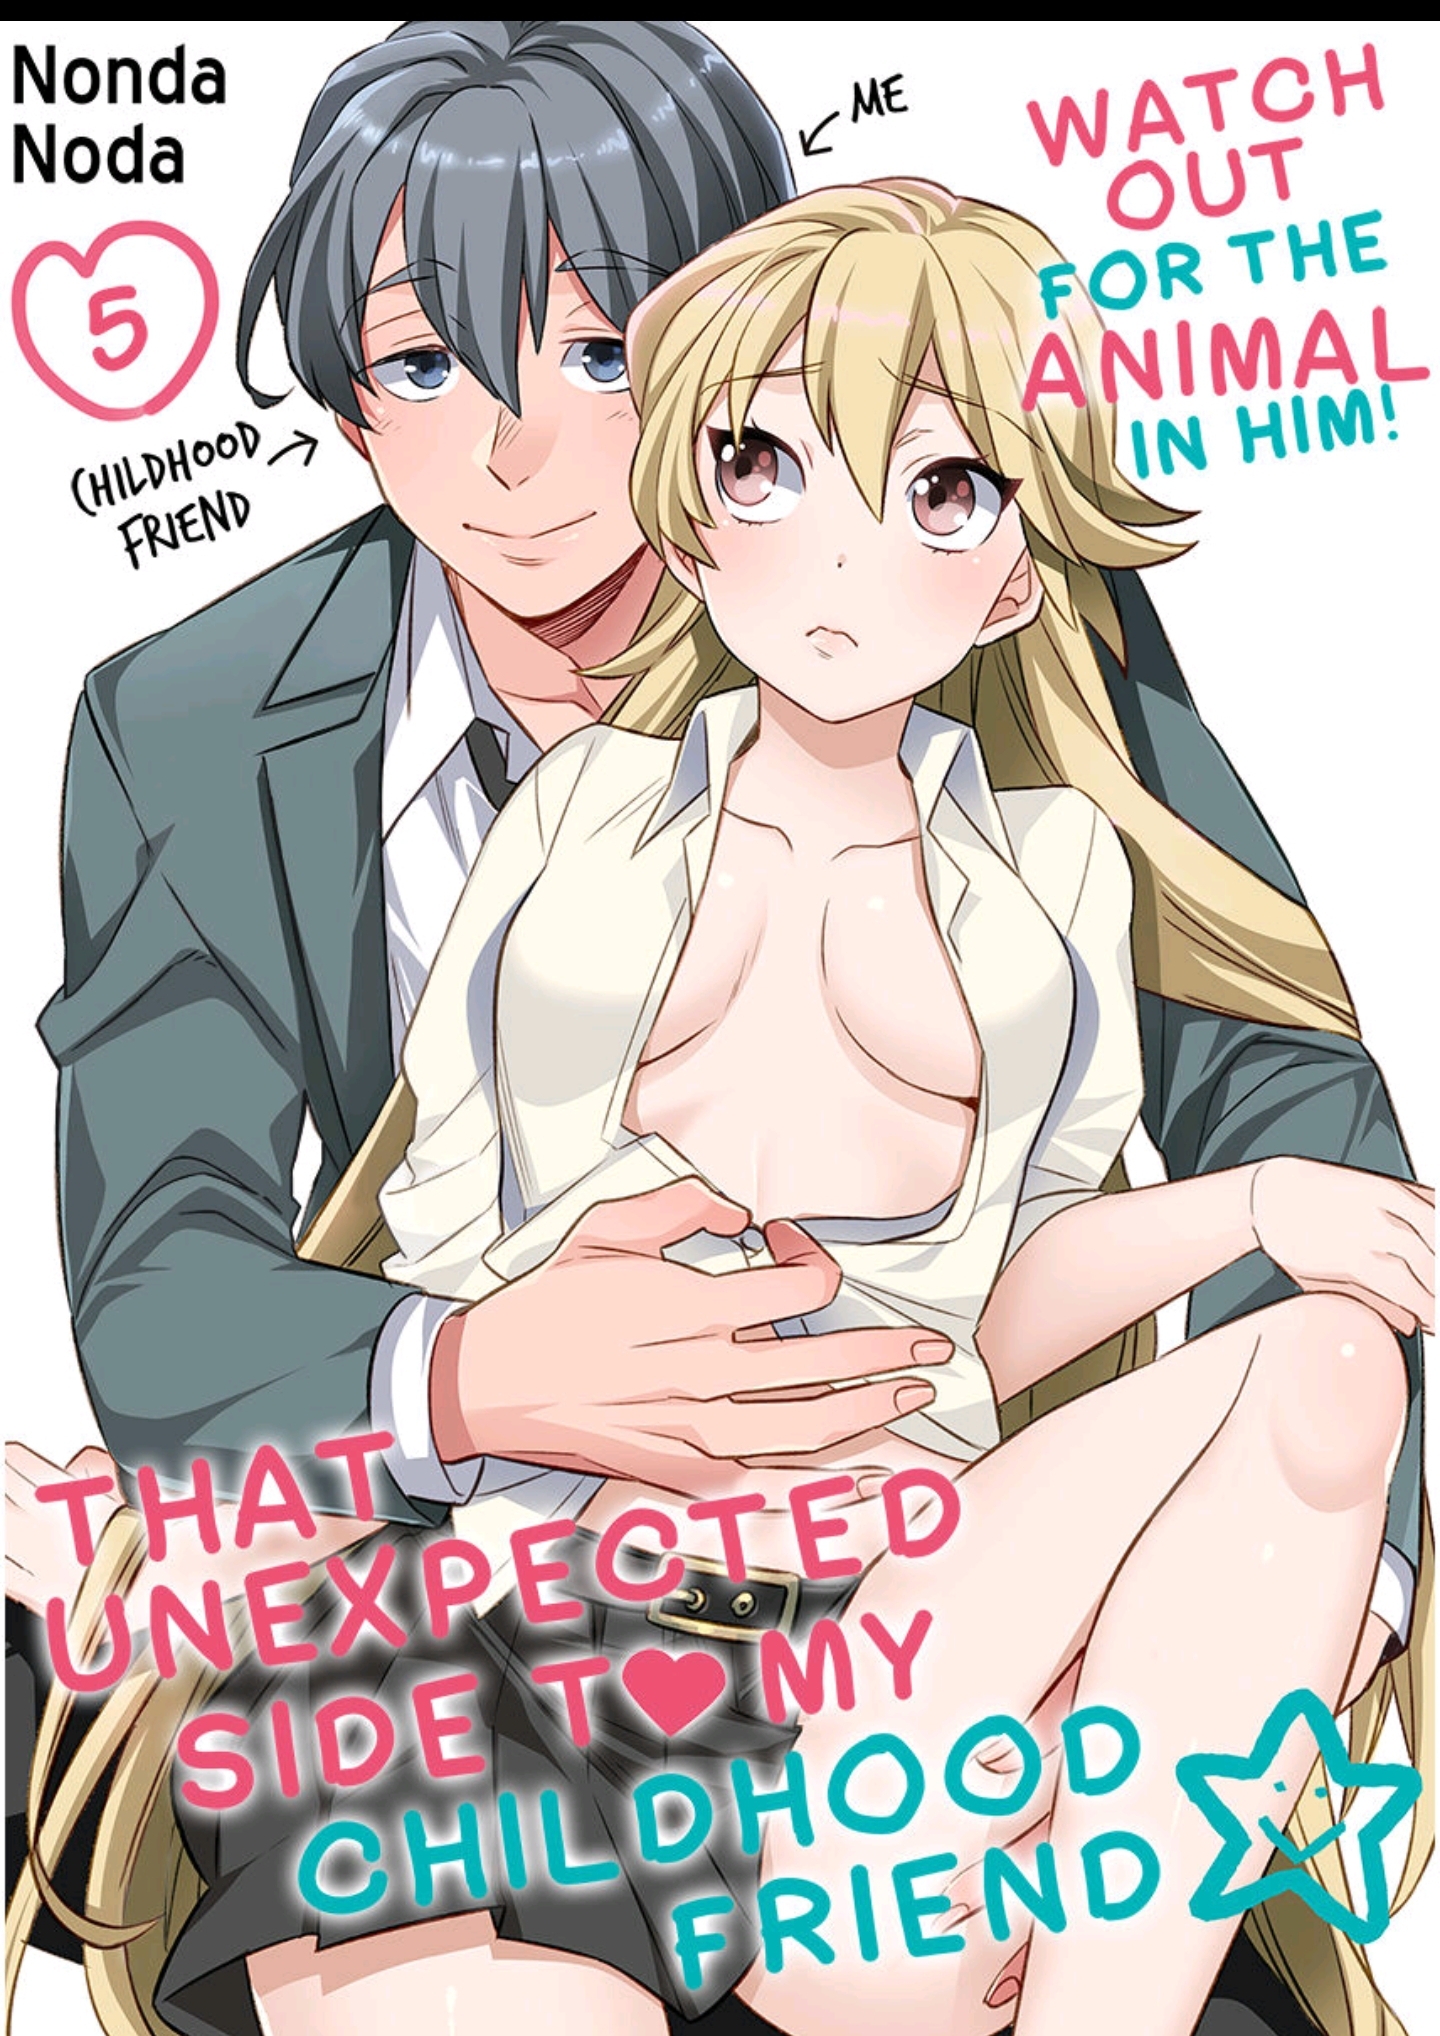 That Unexpected Side to my Childhood Friend -Watch Out for the Animal in Him! Vol.1 Ch.5